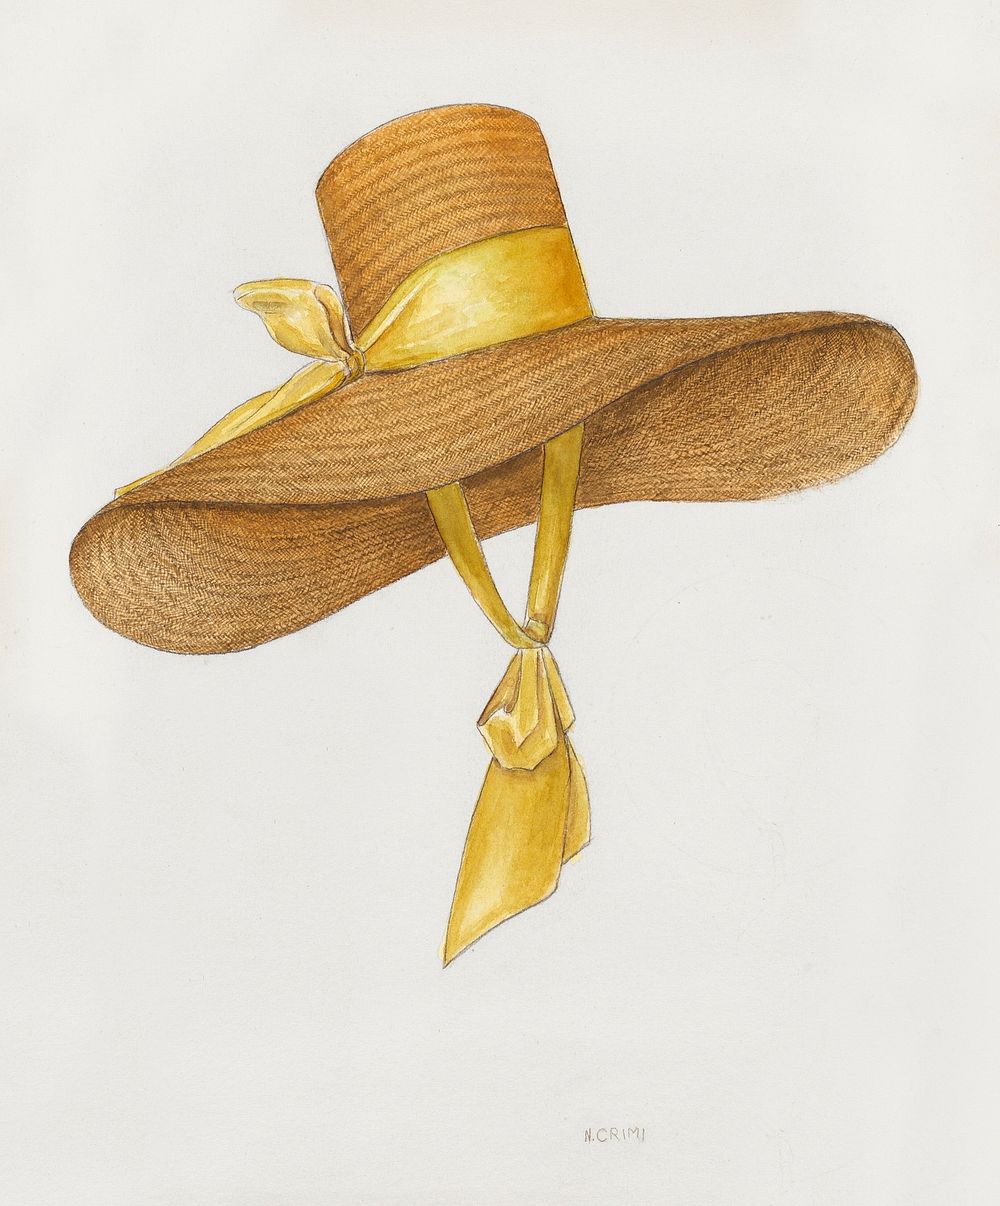 Hat (ca.1936) by Nancy Crimi. Original from The National Gallery of Art. Digitally enhanced by rawpixel.